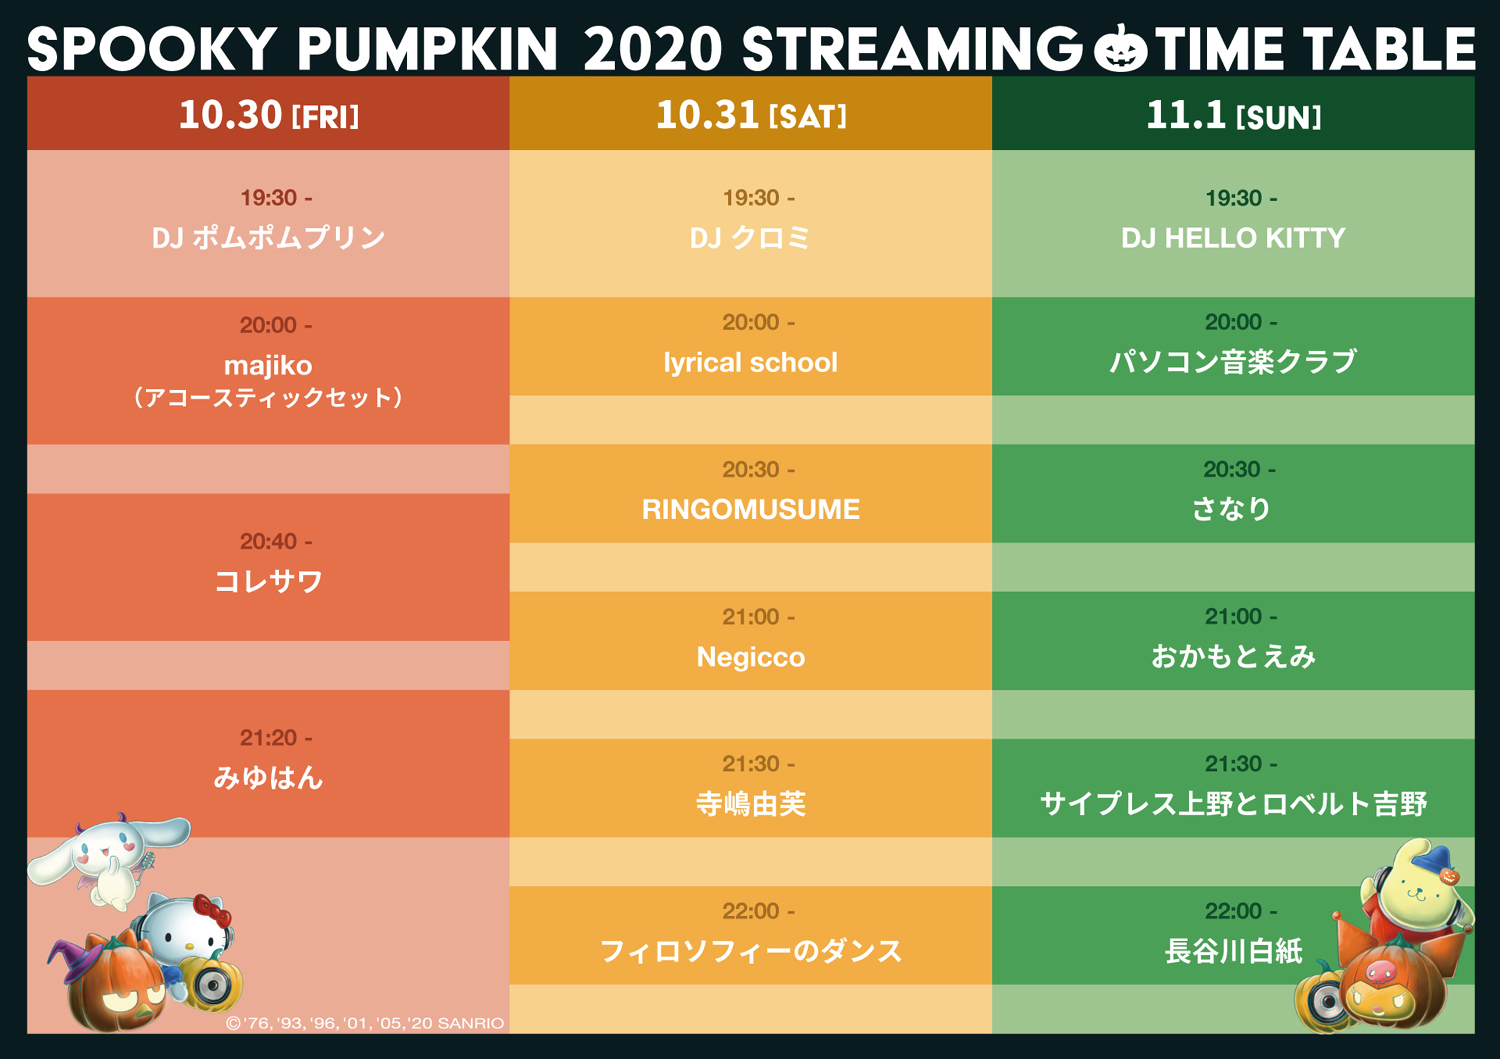 "SPOOKY PUMPKIN 2020 STREAMING" Time Table